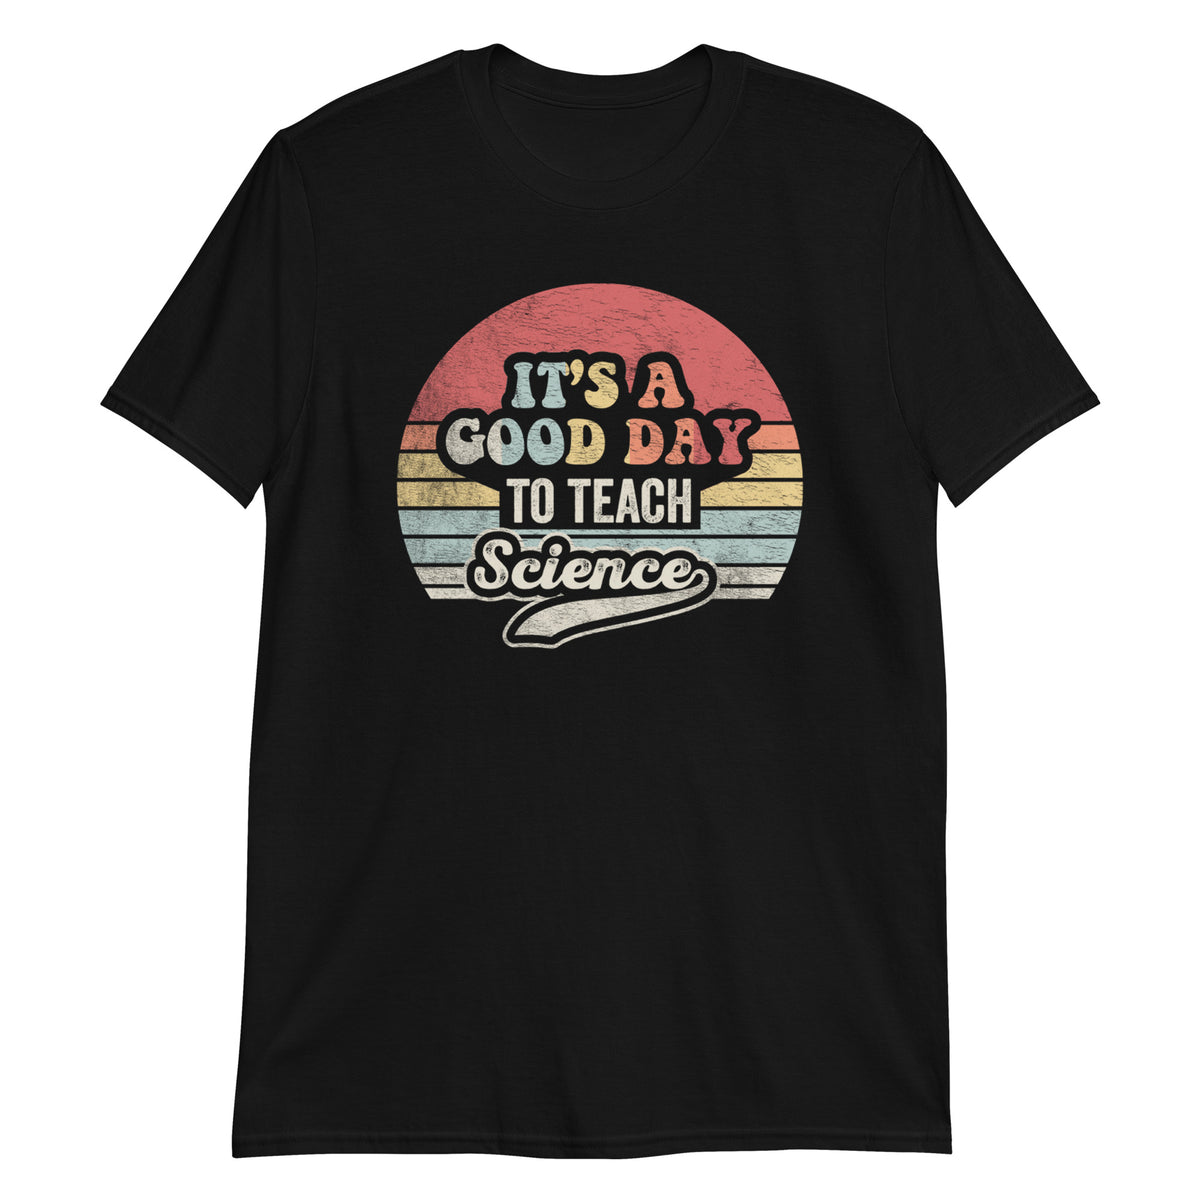 It's a Good Day to Teach Science T-Shirt